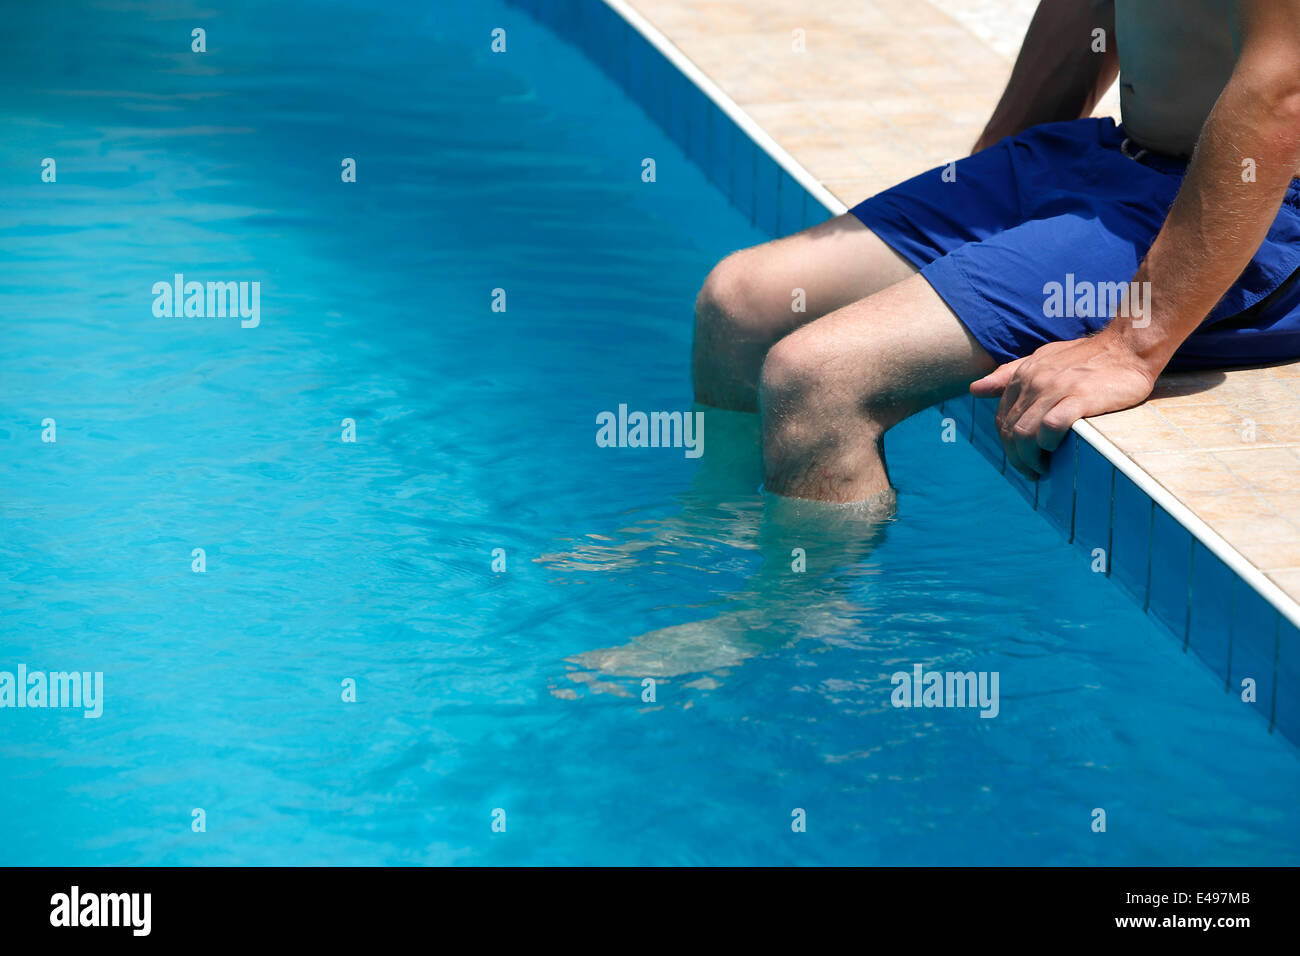 Attractive man with blue swimsuit enjoys sun at a swimming pool Stock Photo